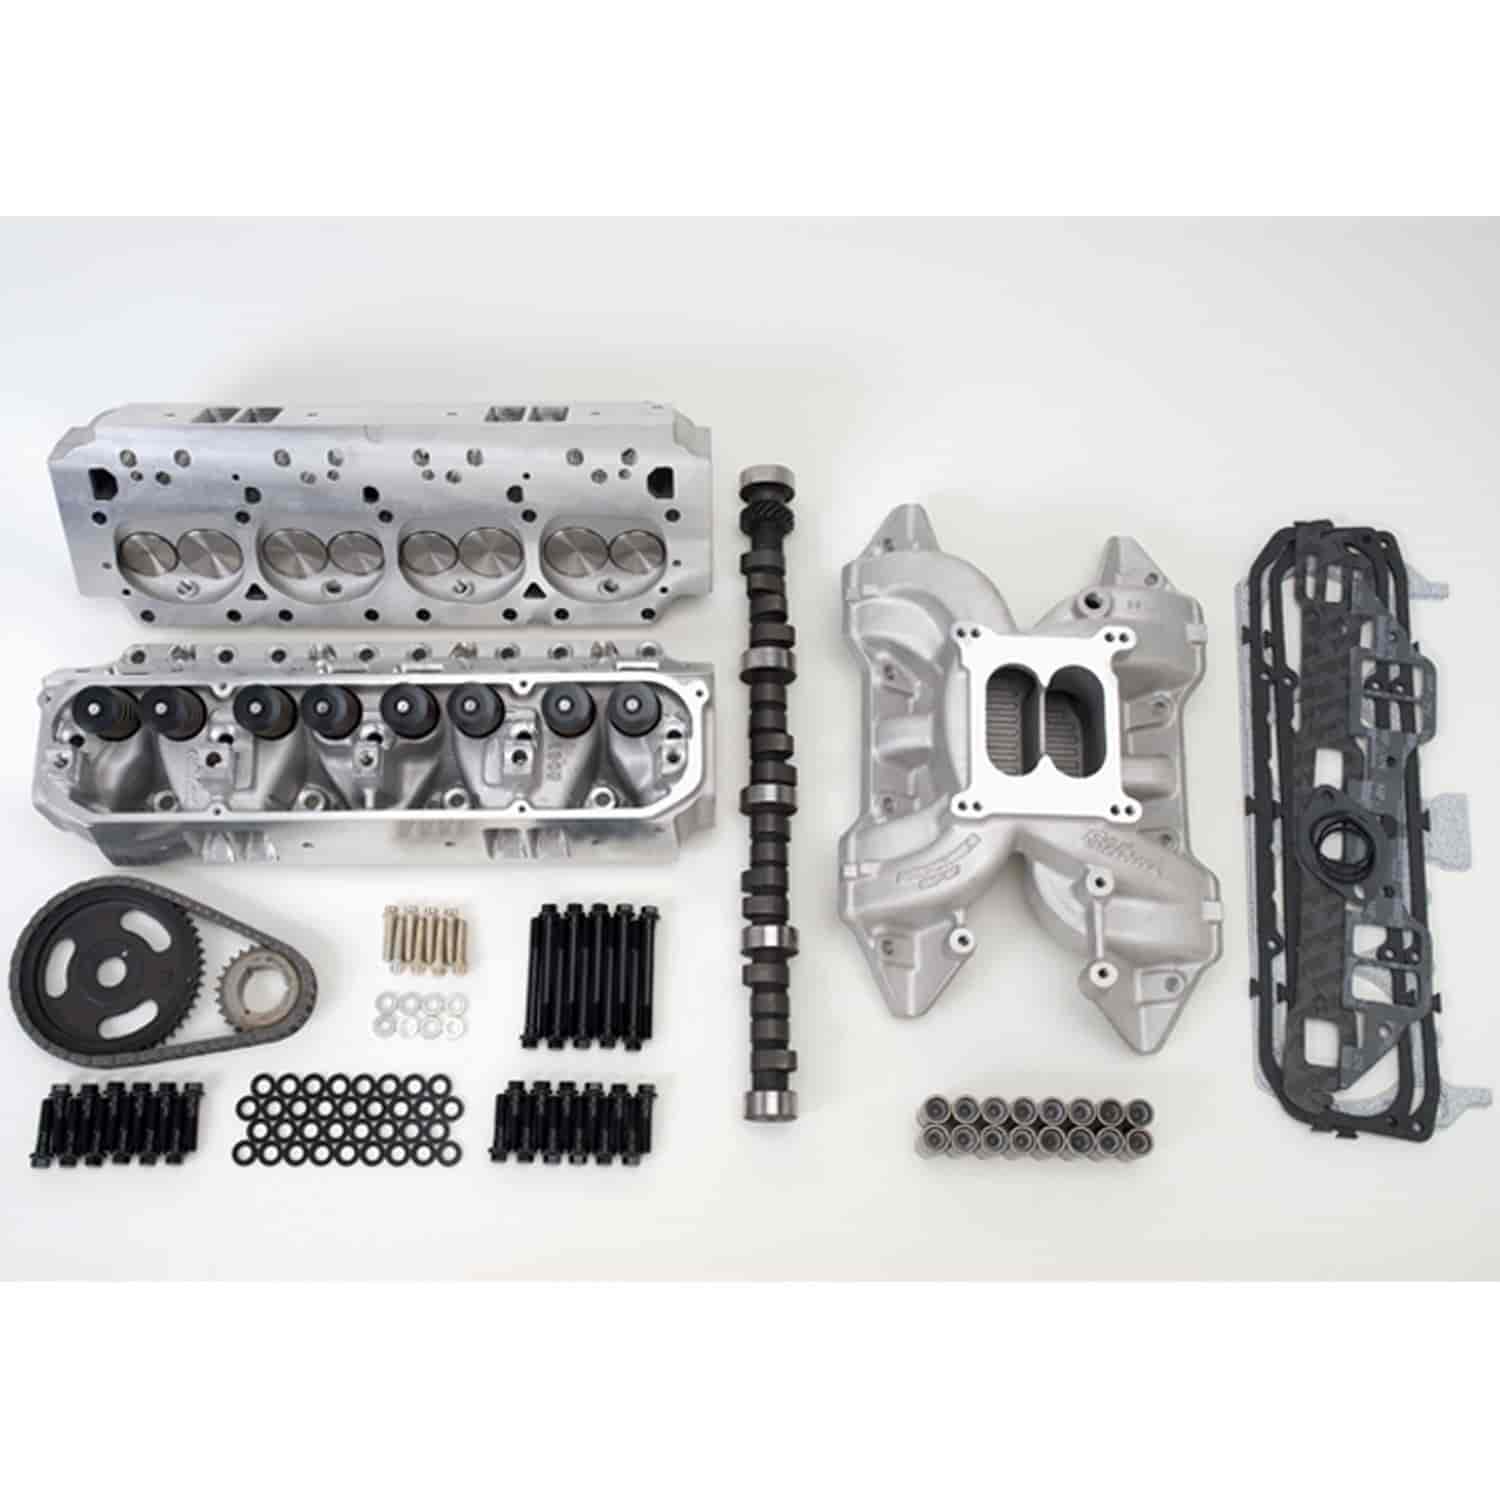 RPM Power Package Top End Kit for 1967-1991